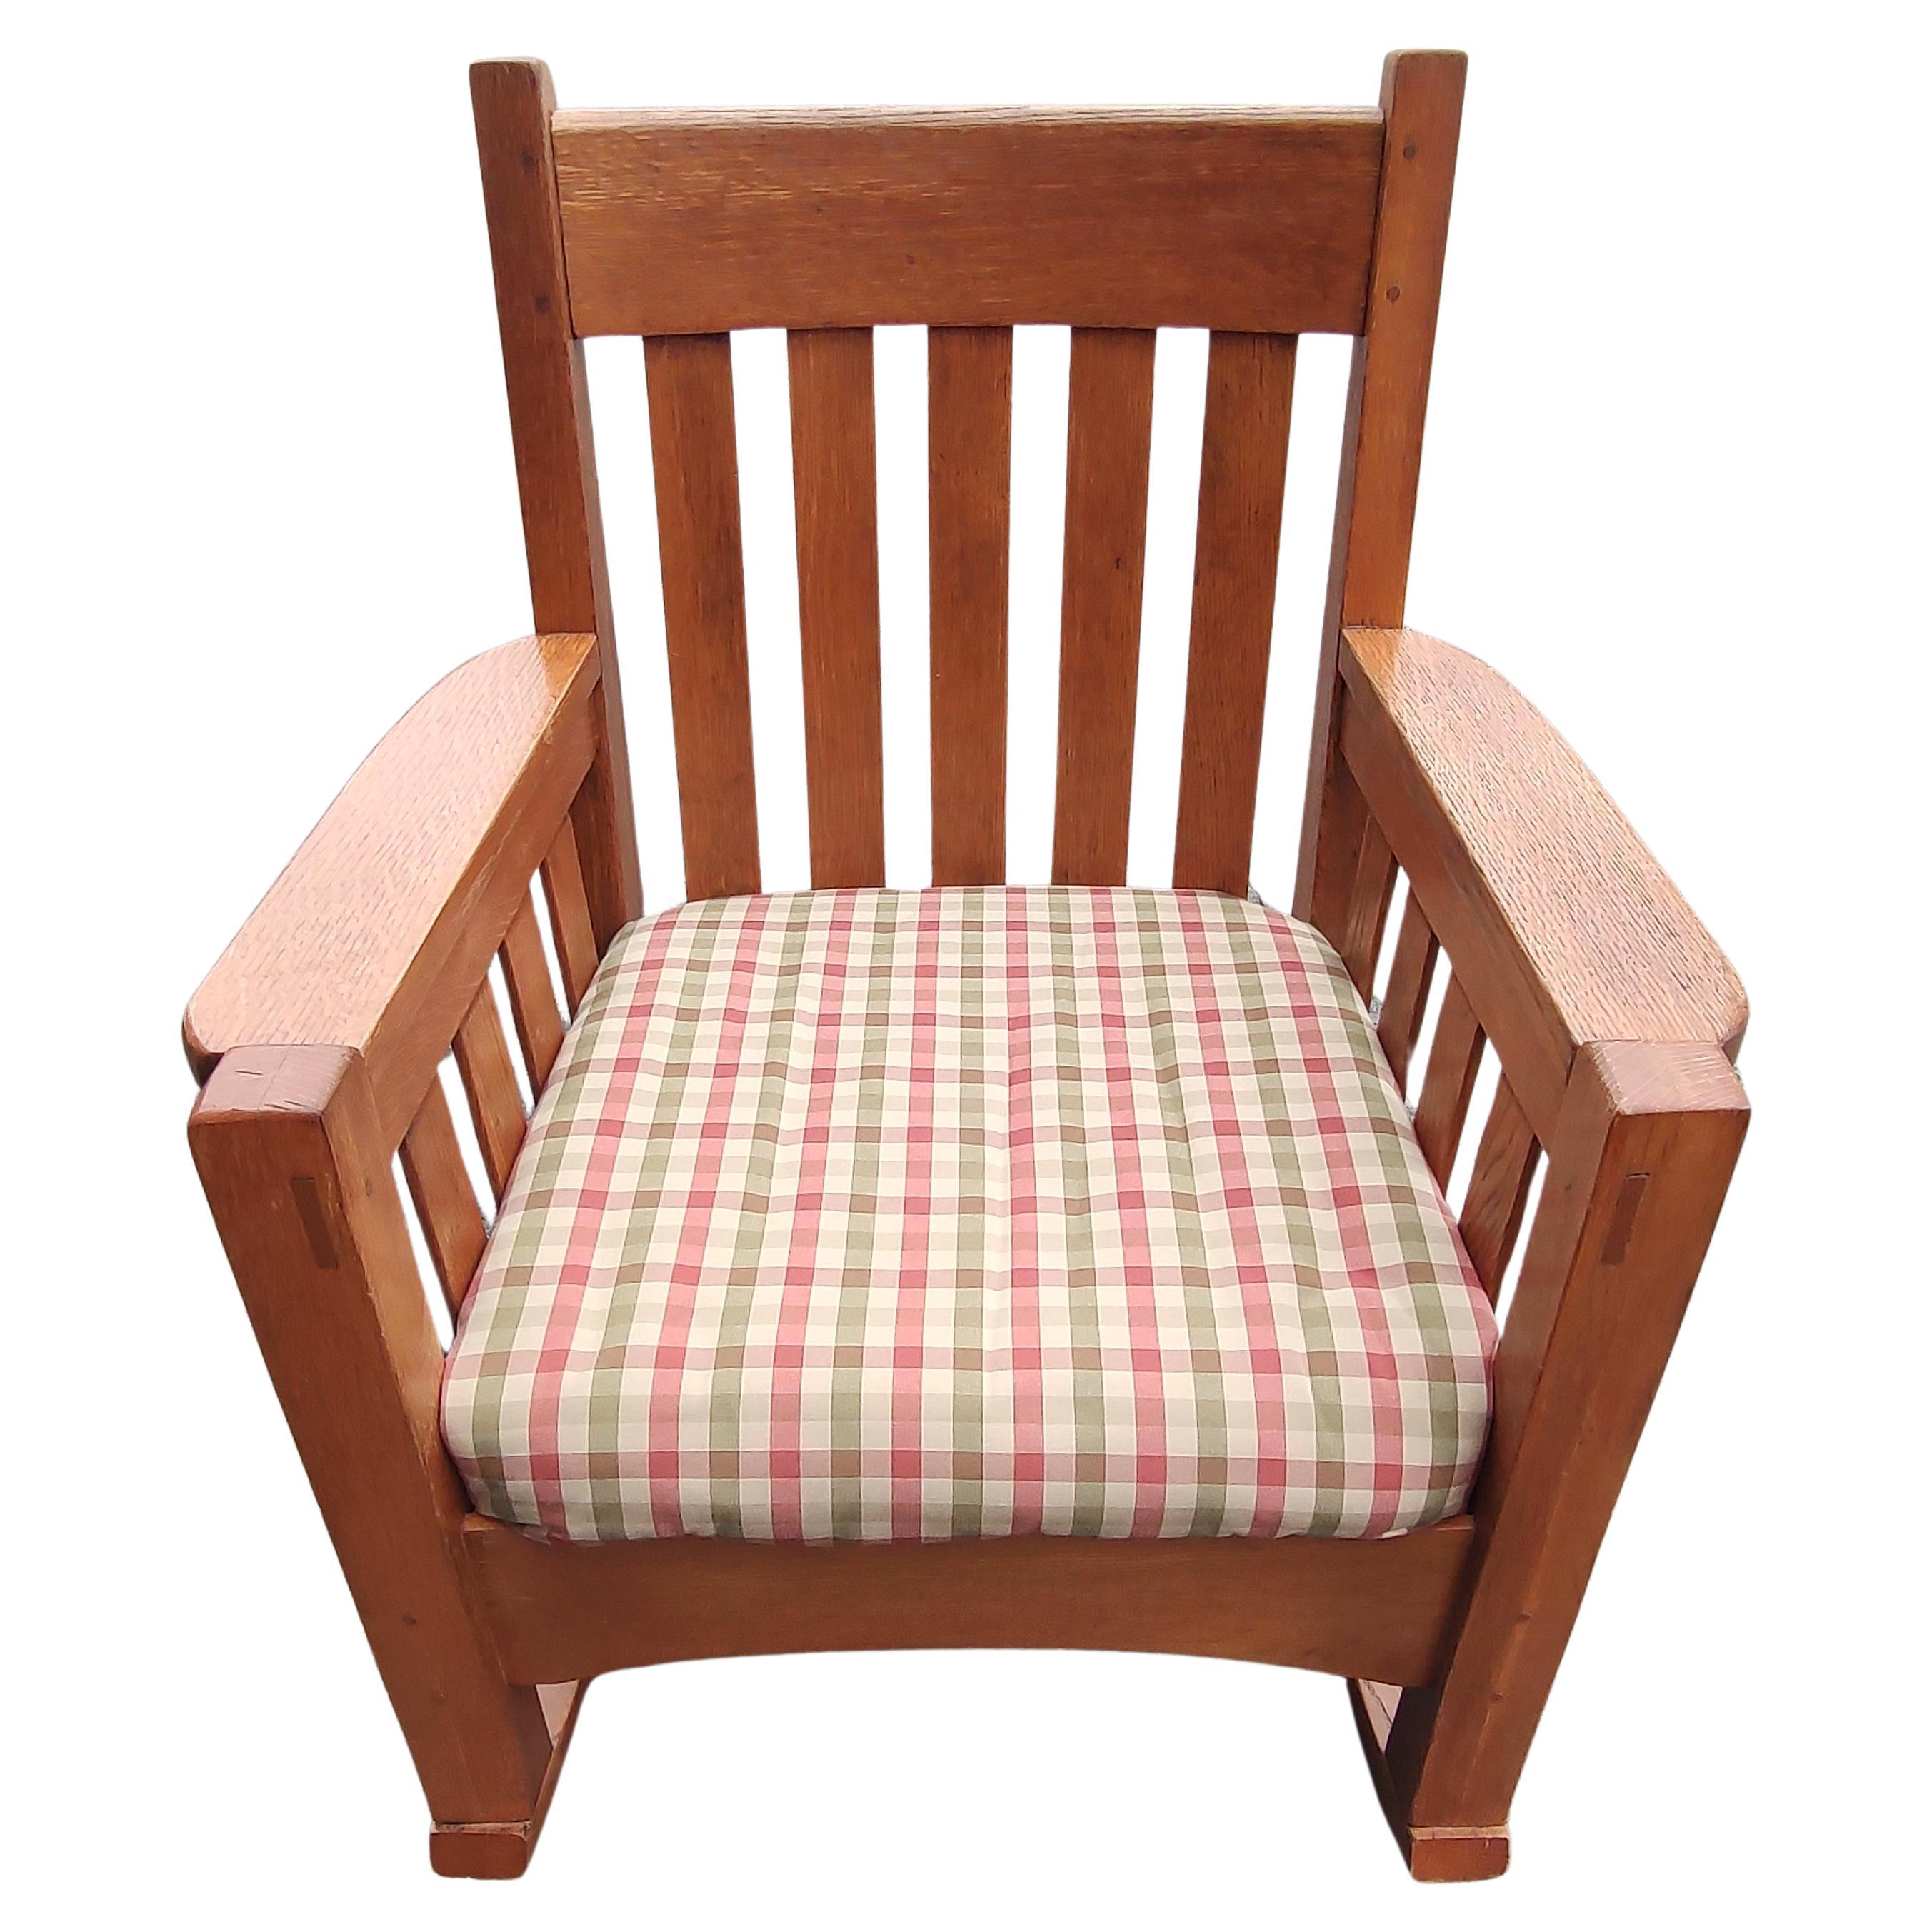 Arts & Crafts Mission Oak Slatted Rocking Chair by Harden C1910 In Good Condition For Sale In Port Jervis, NY